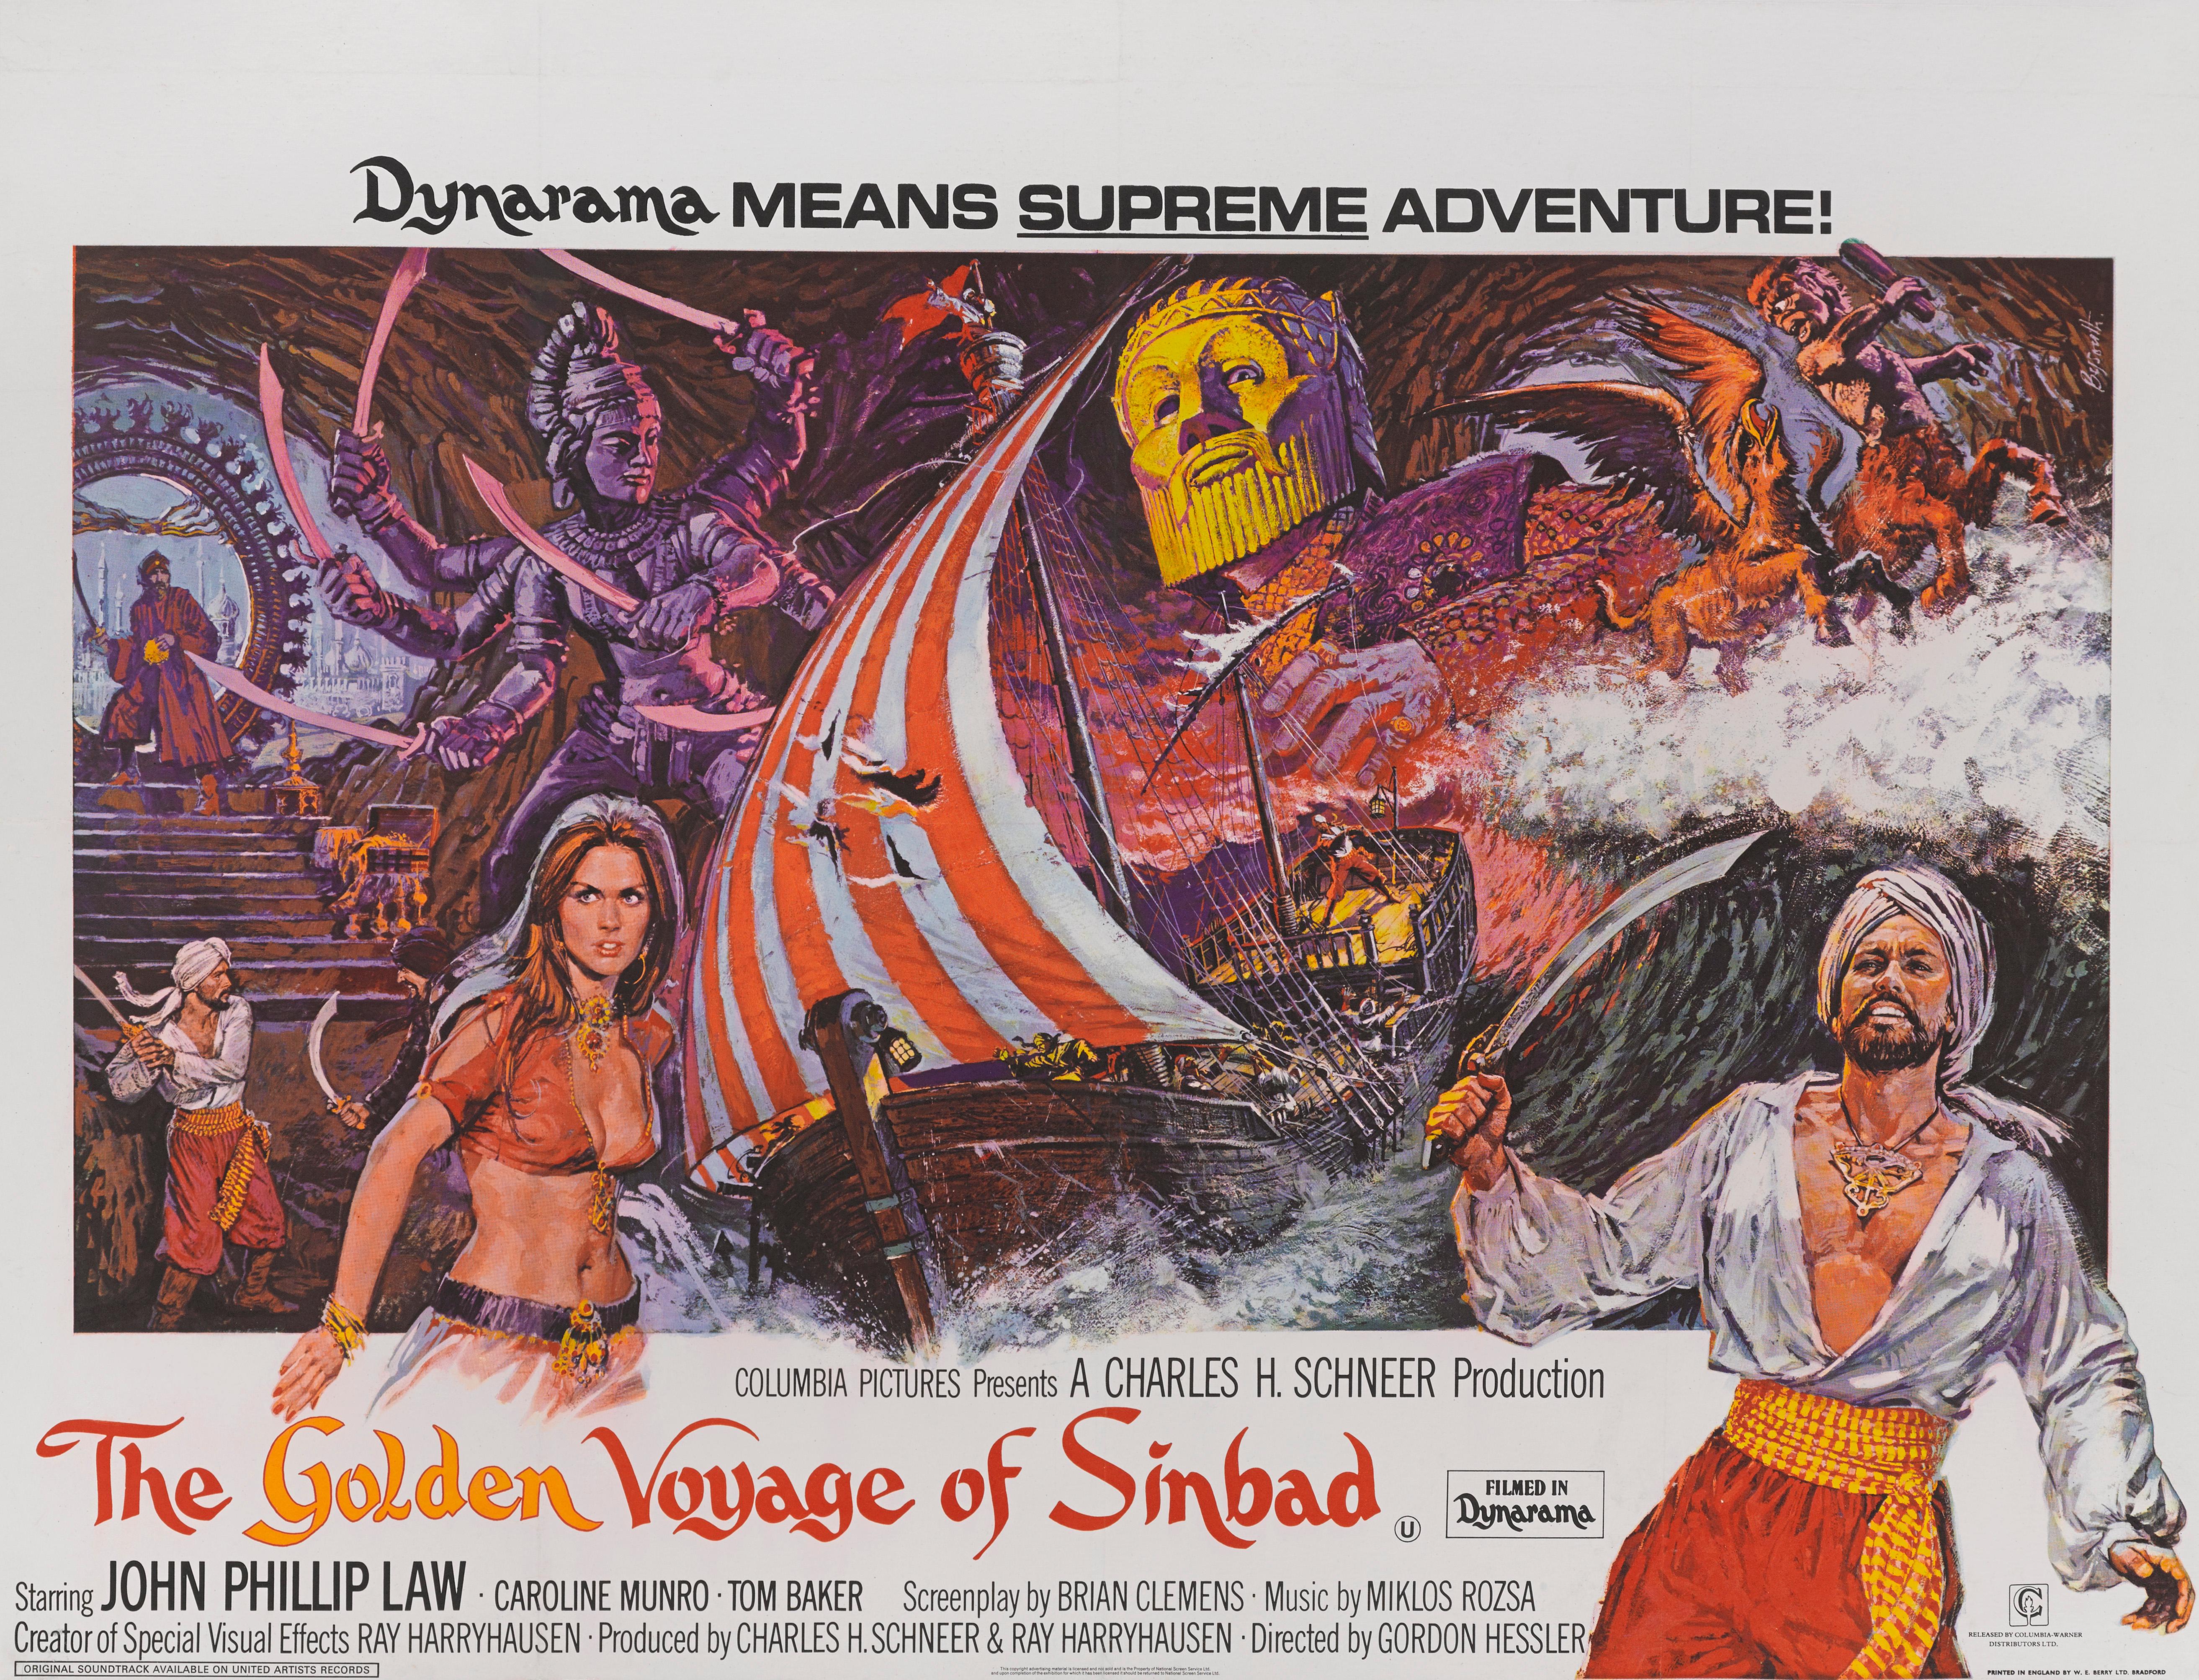 Original British film poster for Gordon Hessler's 1974 film The Golden Voyage of Sinbad.
This fantasy film was directed by Gordon Hessler, and features stop motion effects by Ray Harryhausen, who also co-produced and co-wrote the story.  It is the